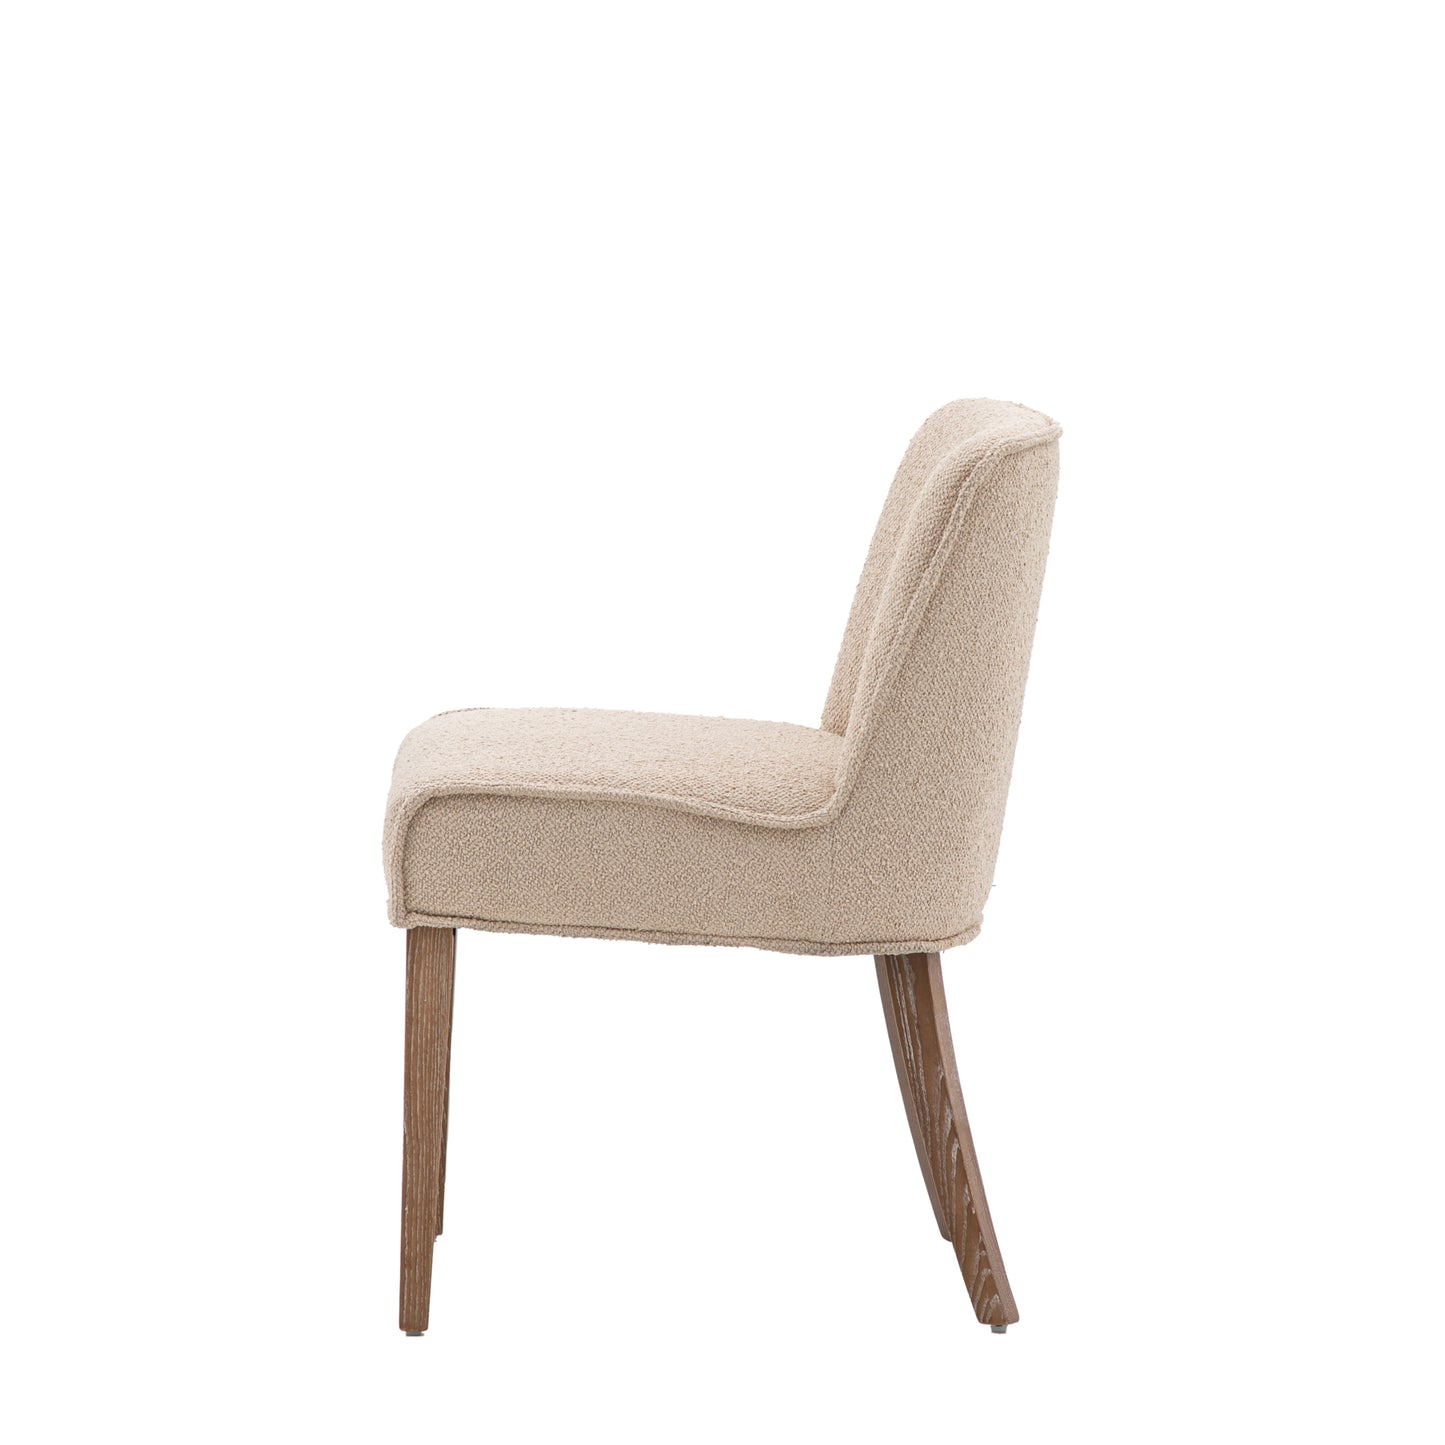 Tarnby Chair | Taupe (2 Pack)